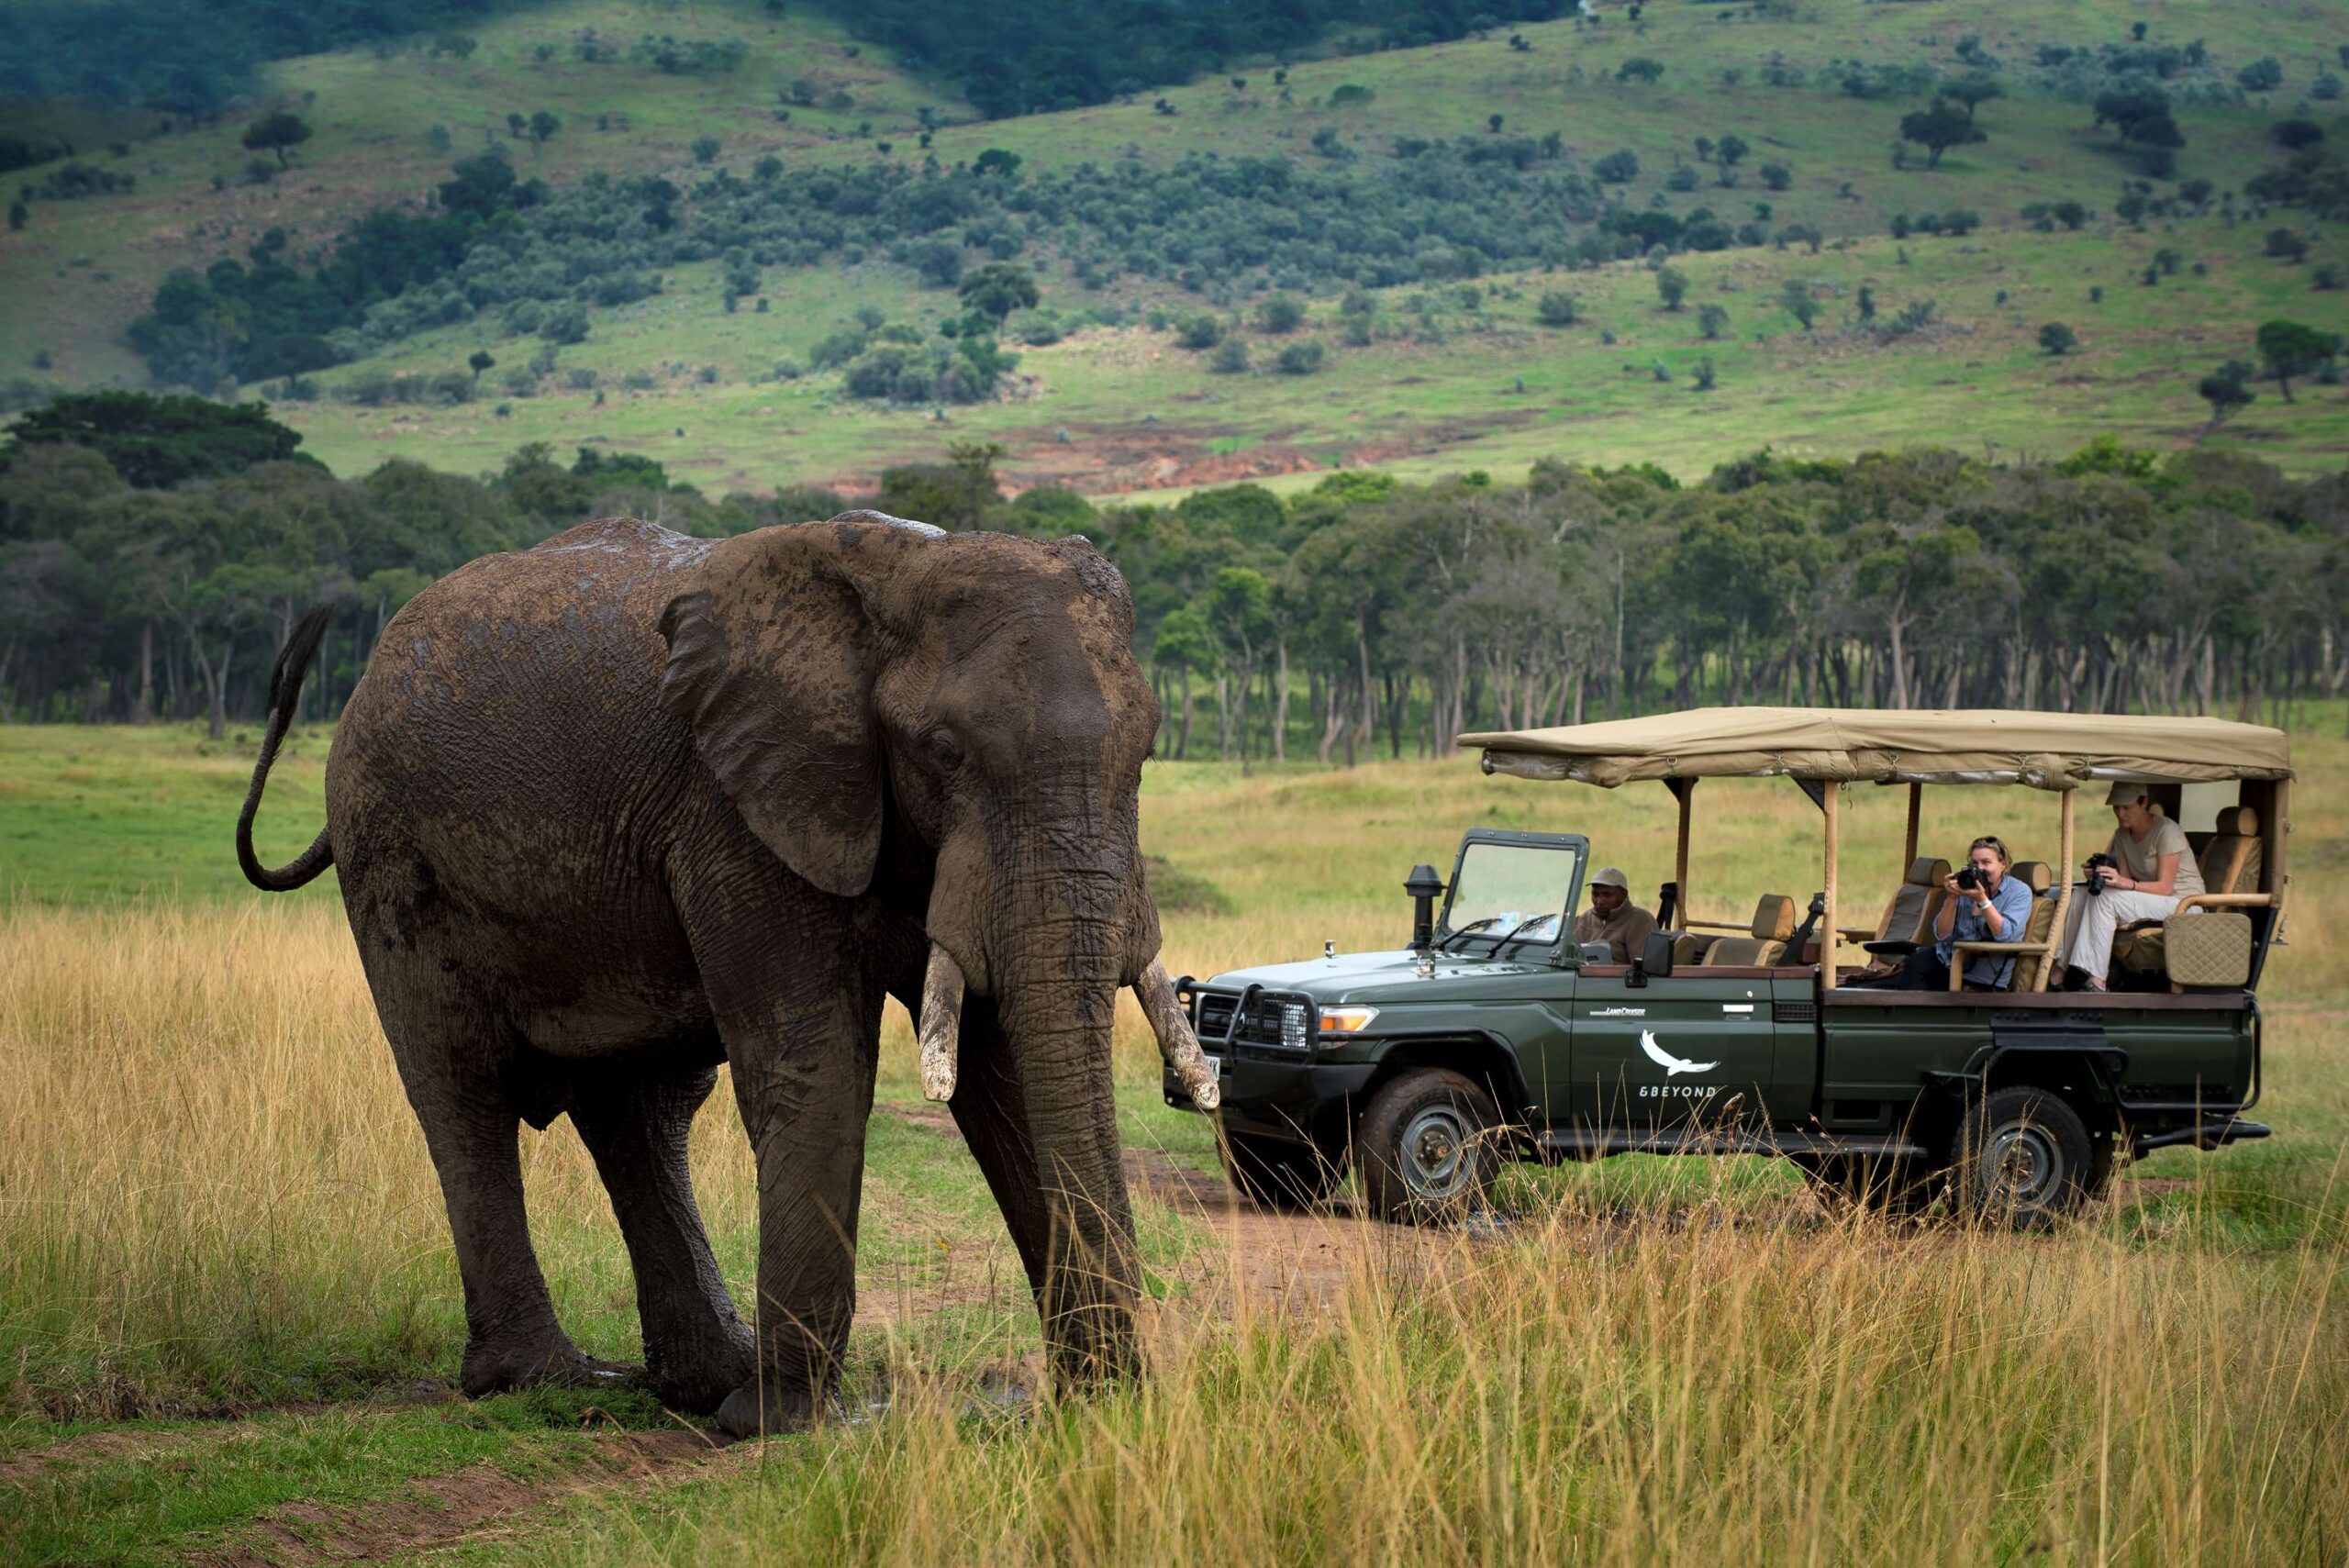 elephant and people in a jeep on a safari in Kenya